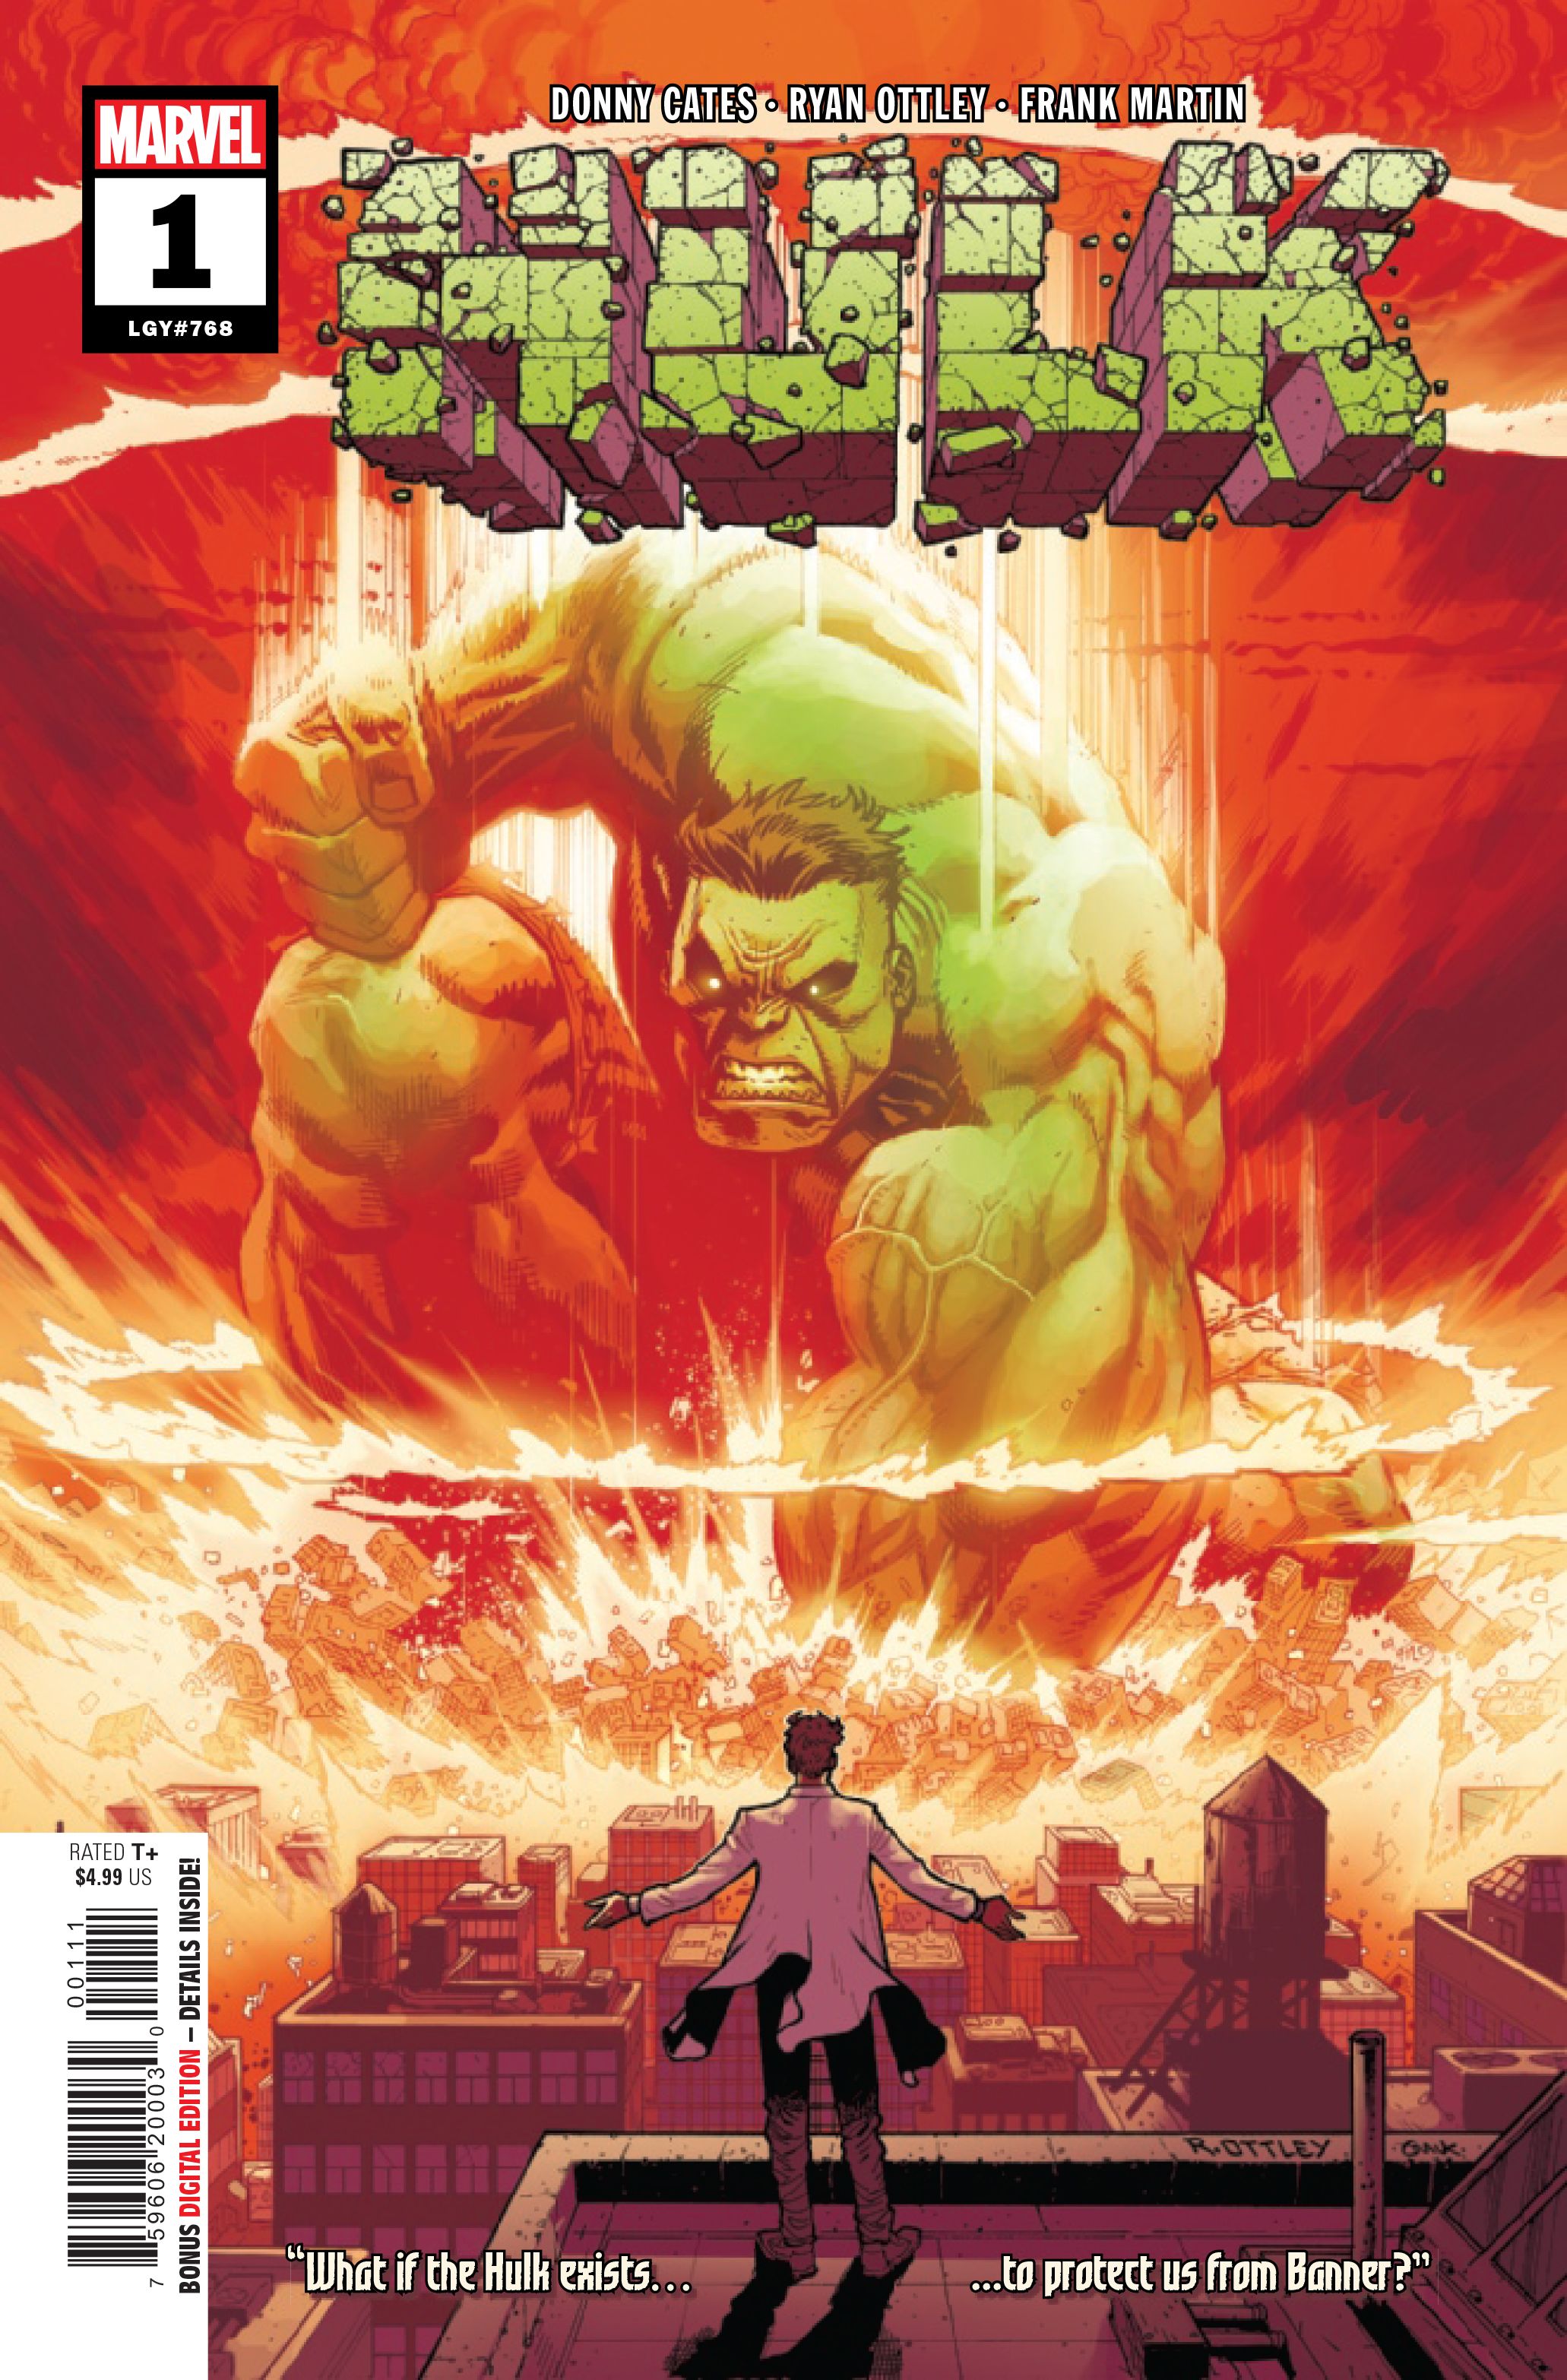 The cover for Hulk #1, by Donny Cates, Ryan Ottley and Frank Martin.